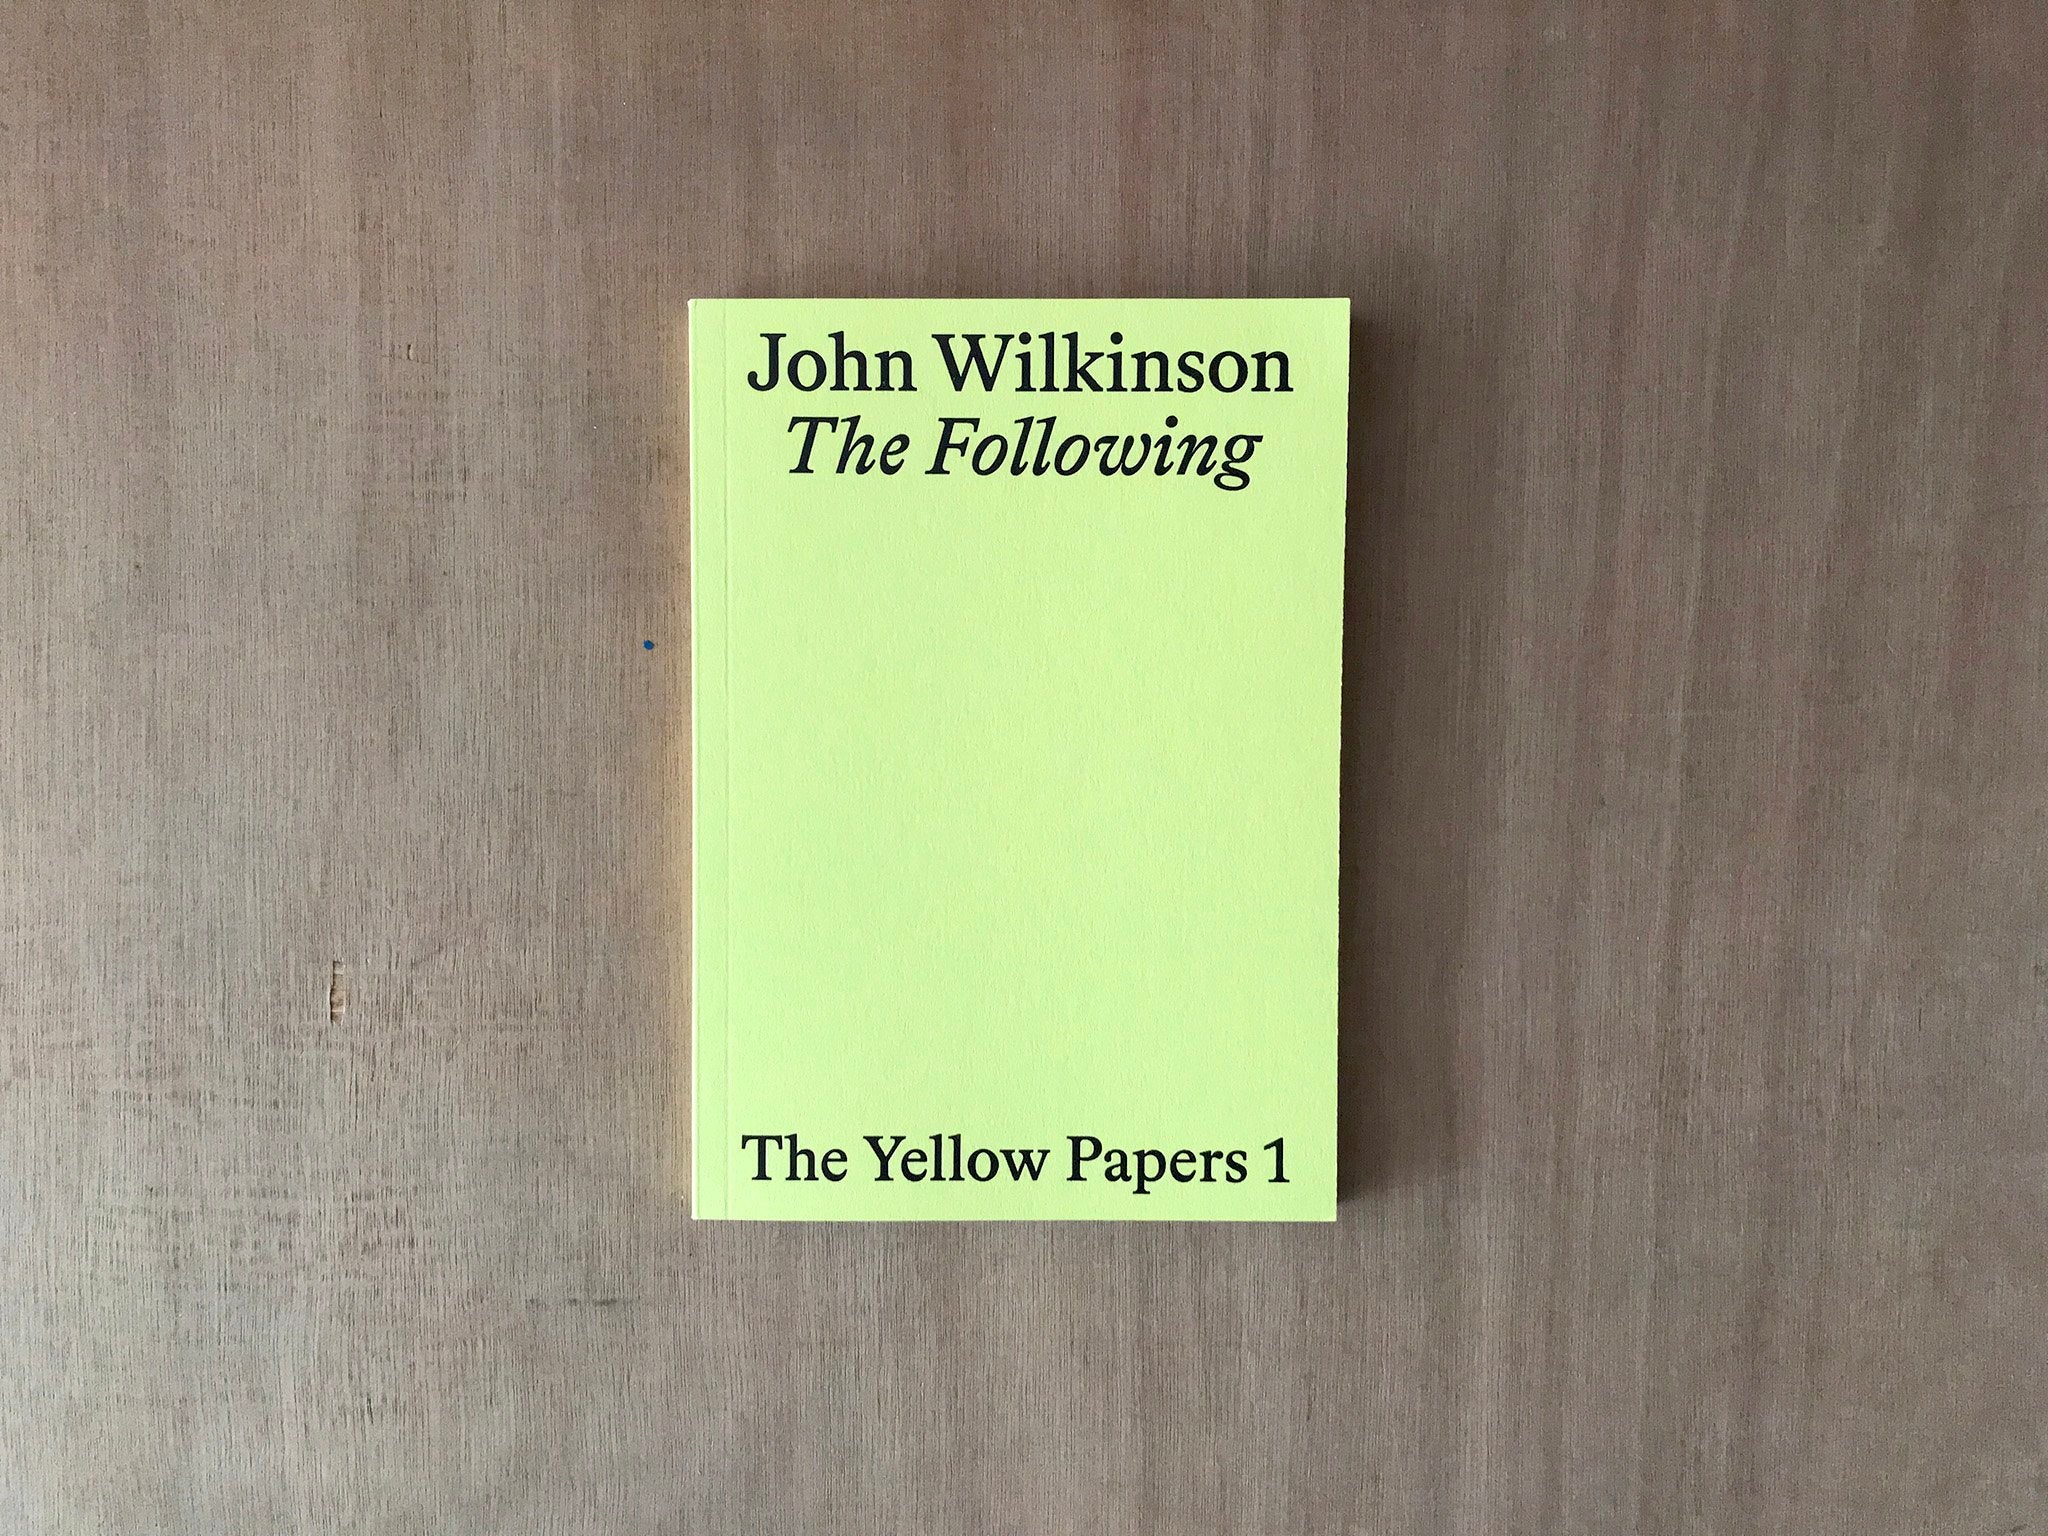 THE YELLOW PAPERS 1: THE FOLLOWING by John Wilkinson